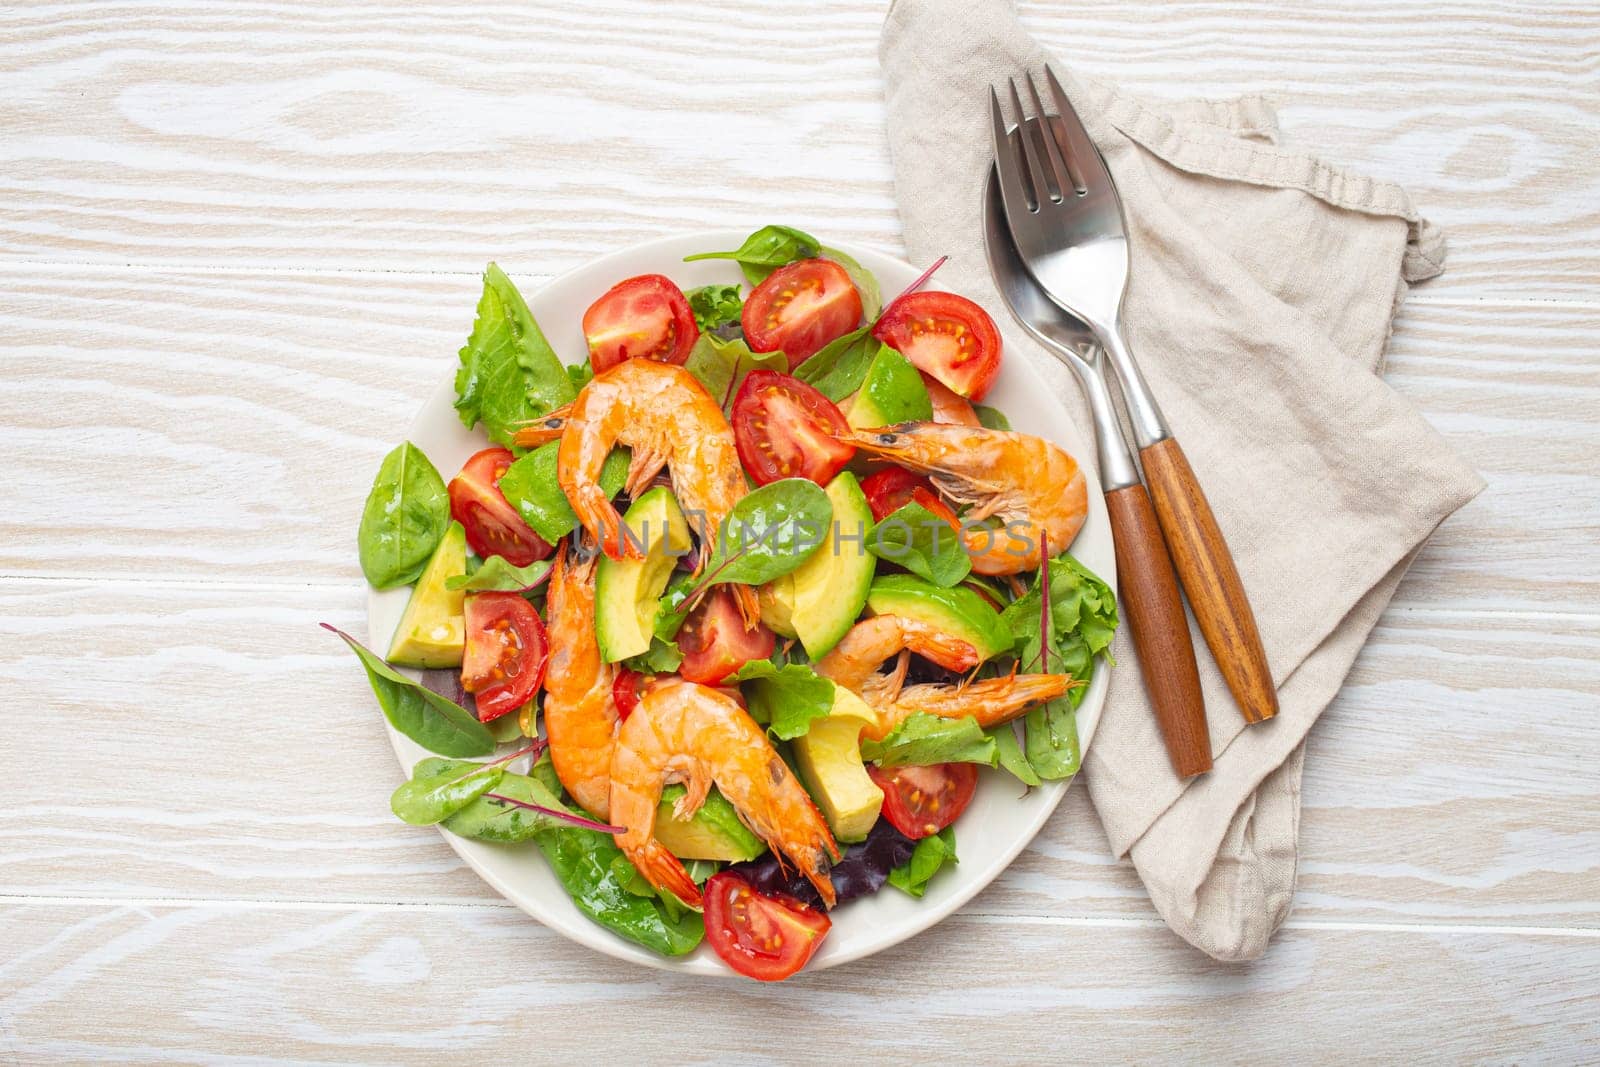 Healthy salad with grilled shrimps, avocado, cherry tomatoes and green leaves on white plate with cutlery on white wooden rustic background top view. Clean eating, nutrition and dieting concept..